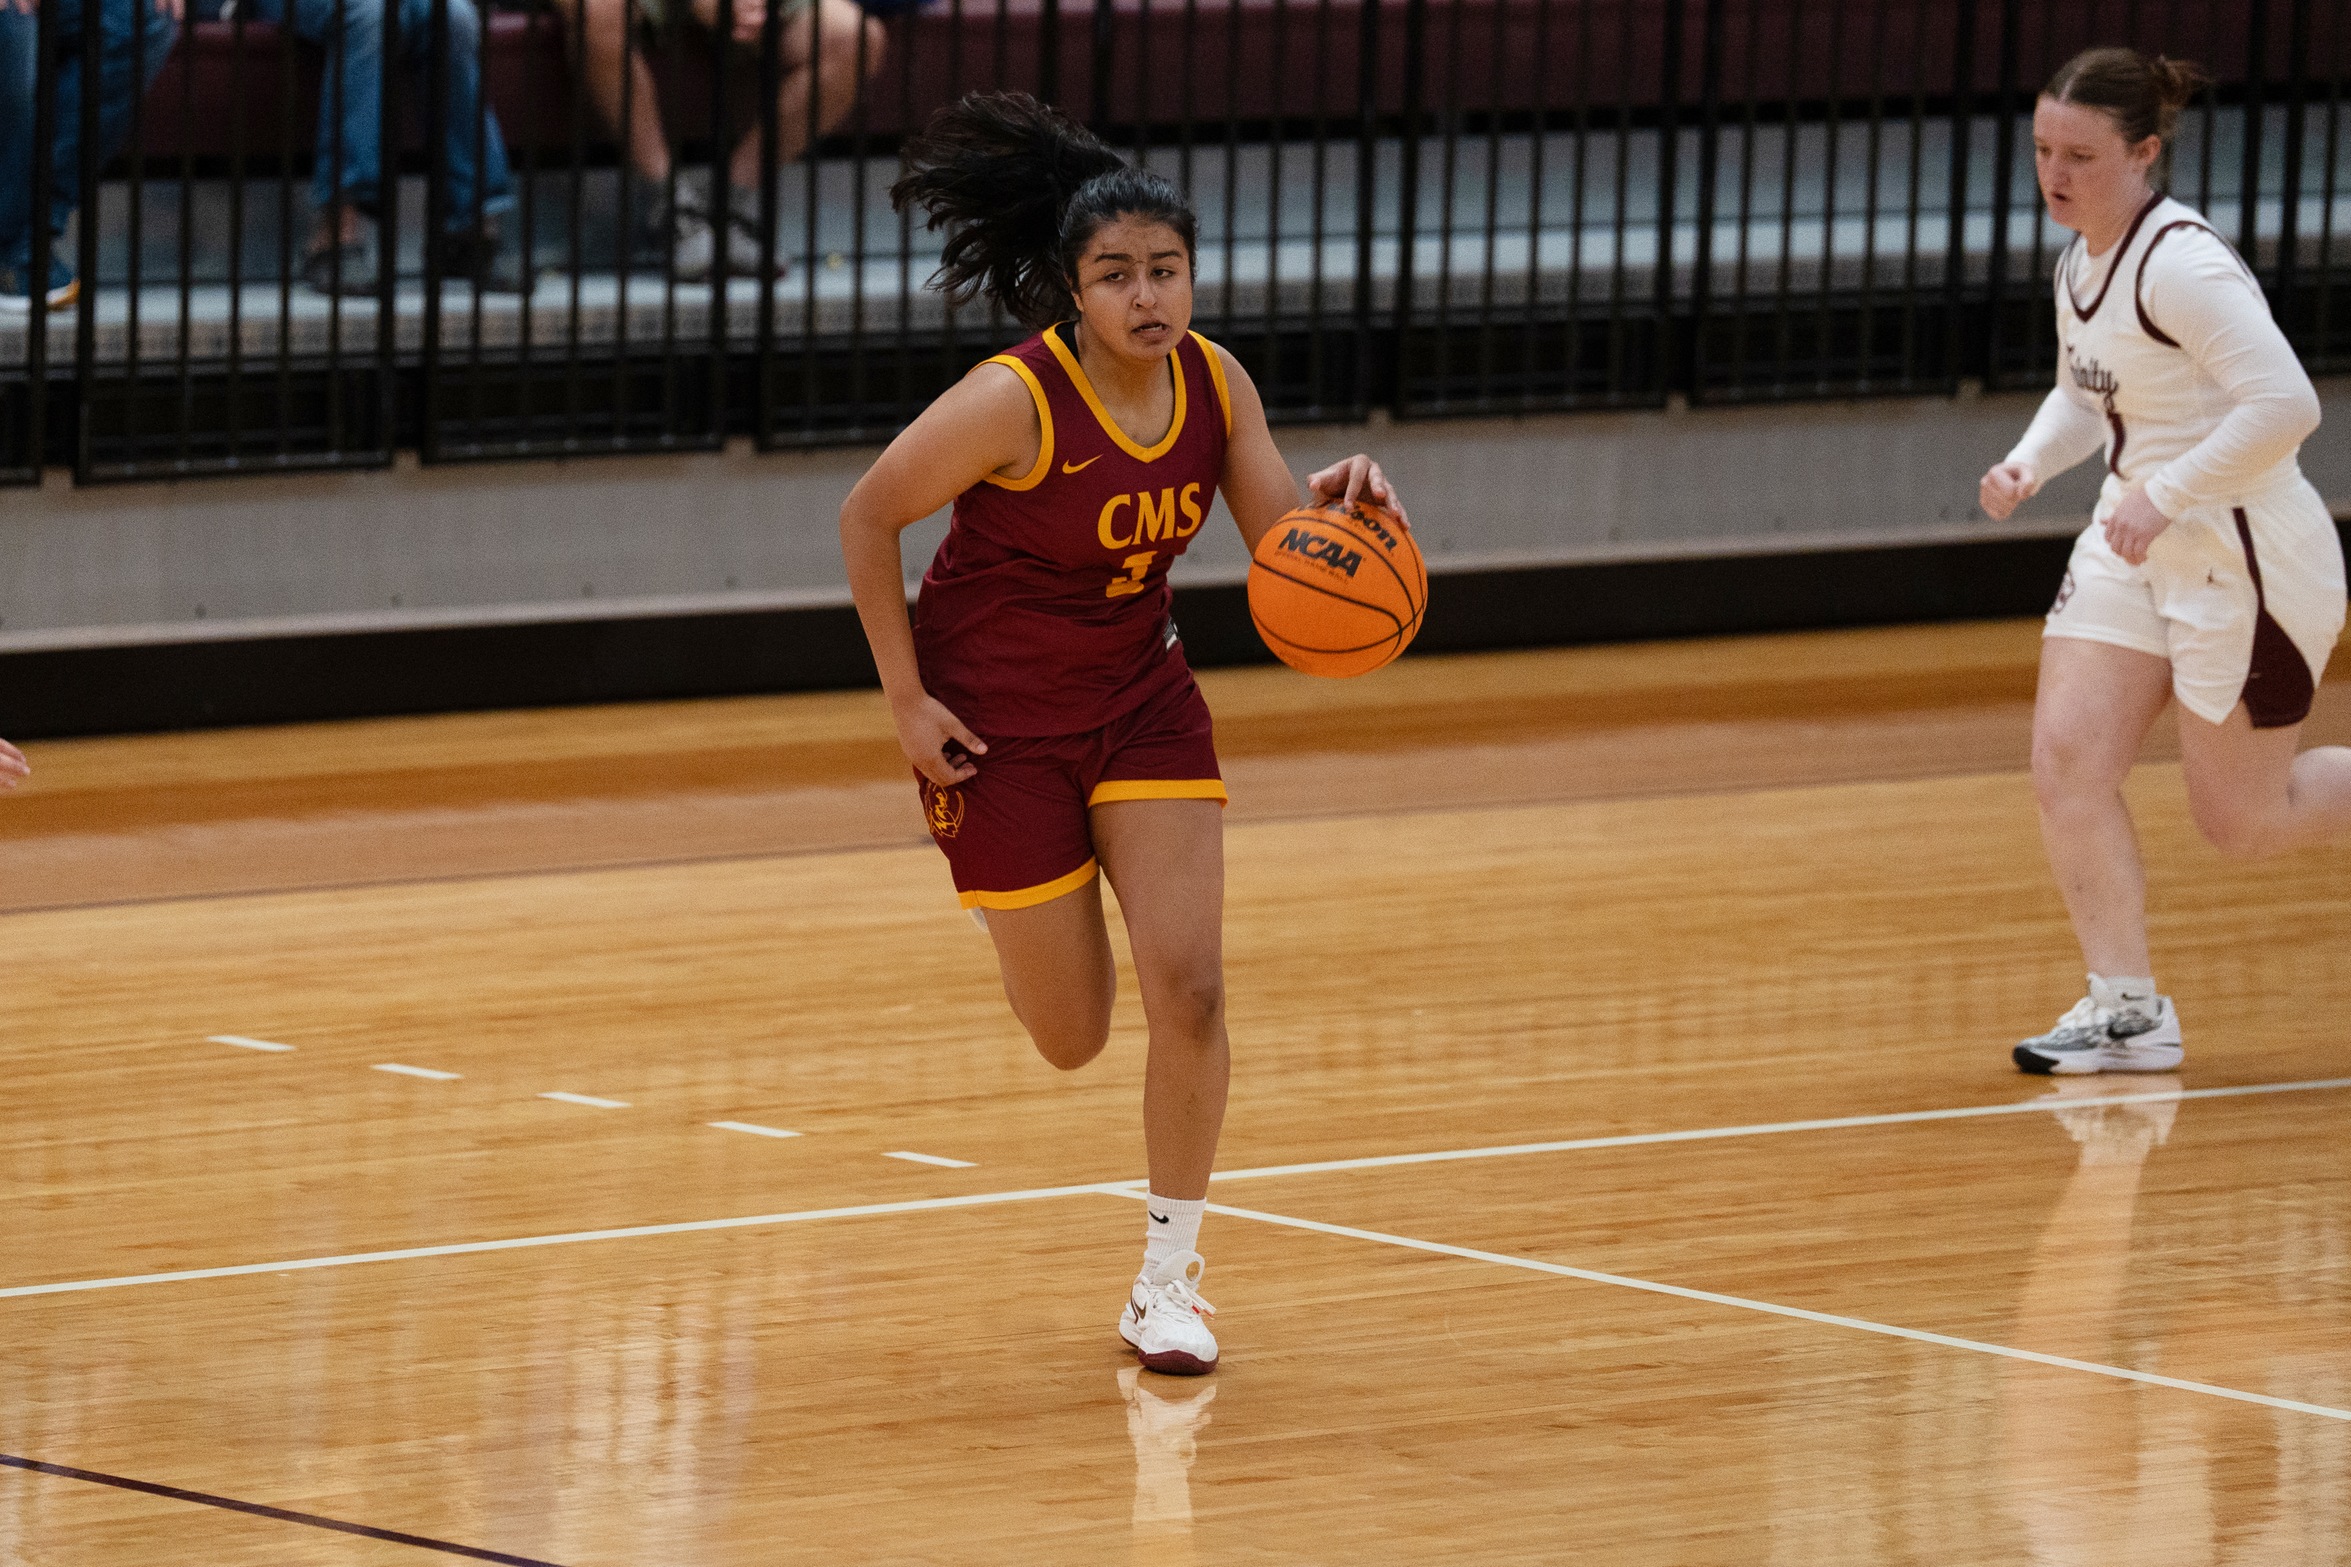 Tanya Ghai had 14 points for the Athenas (photo by Peyton Thibault)